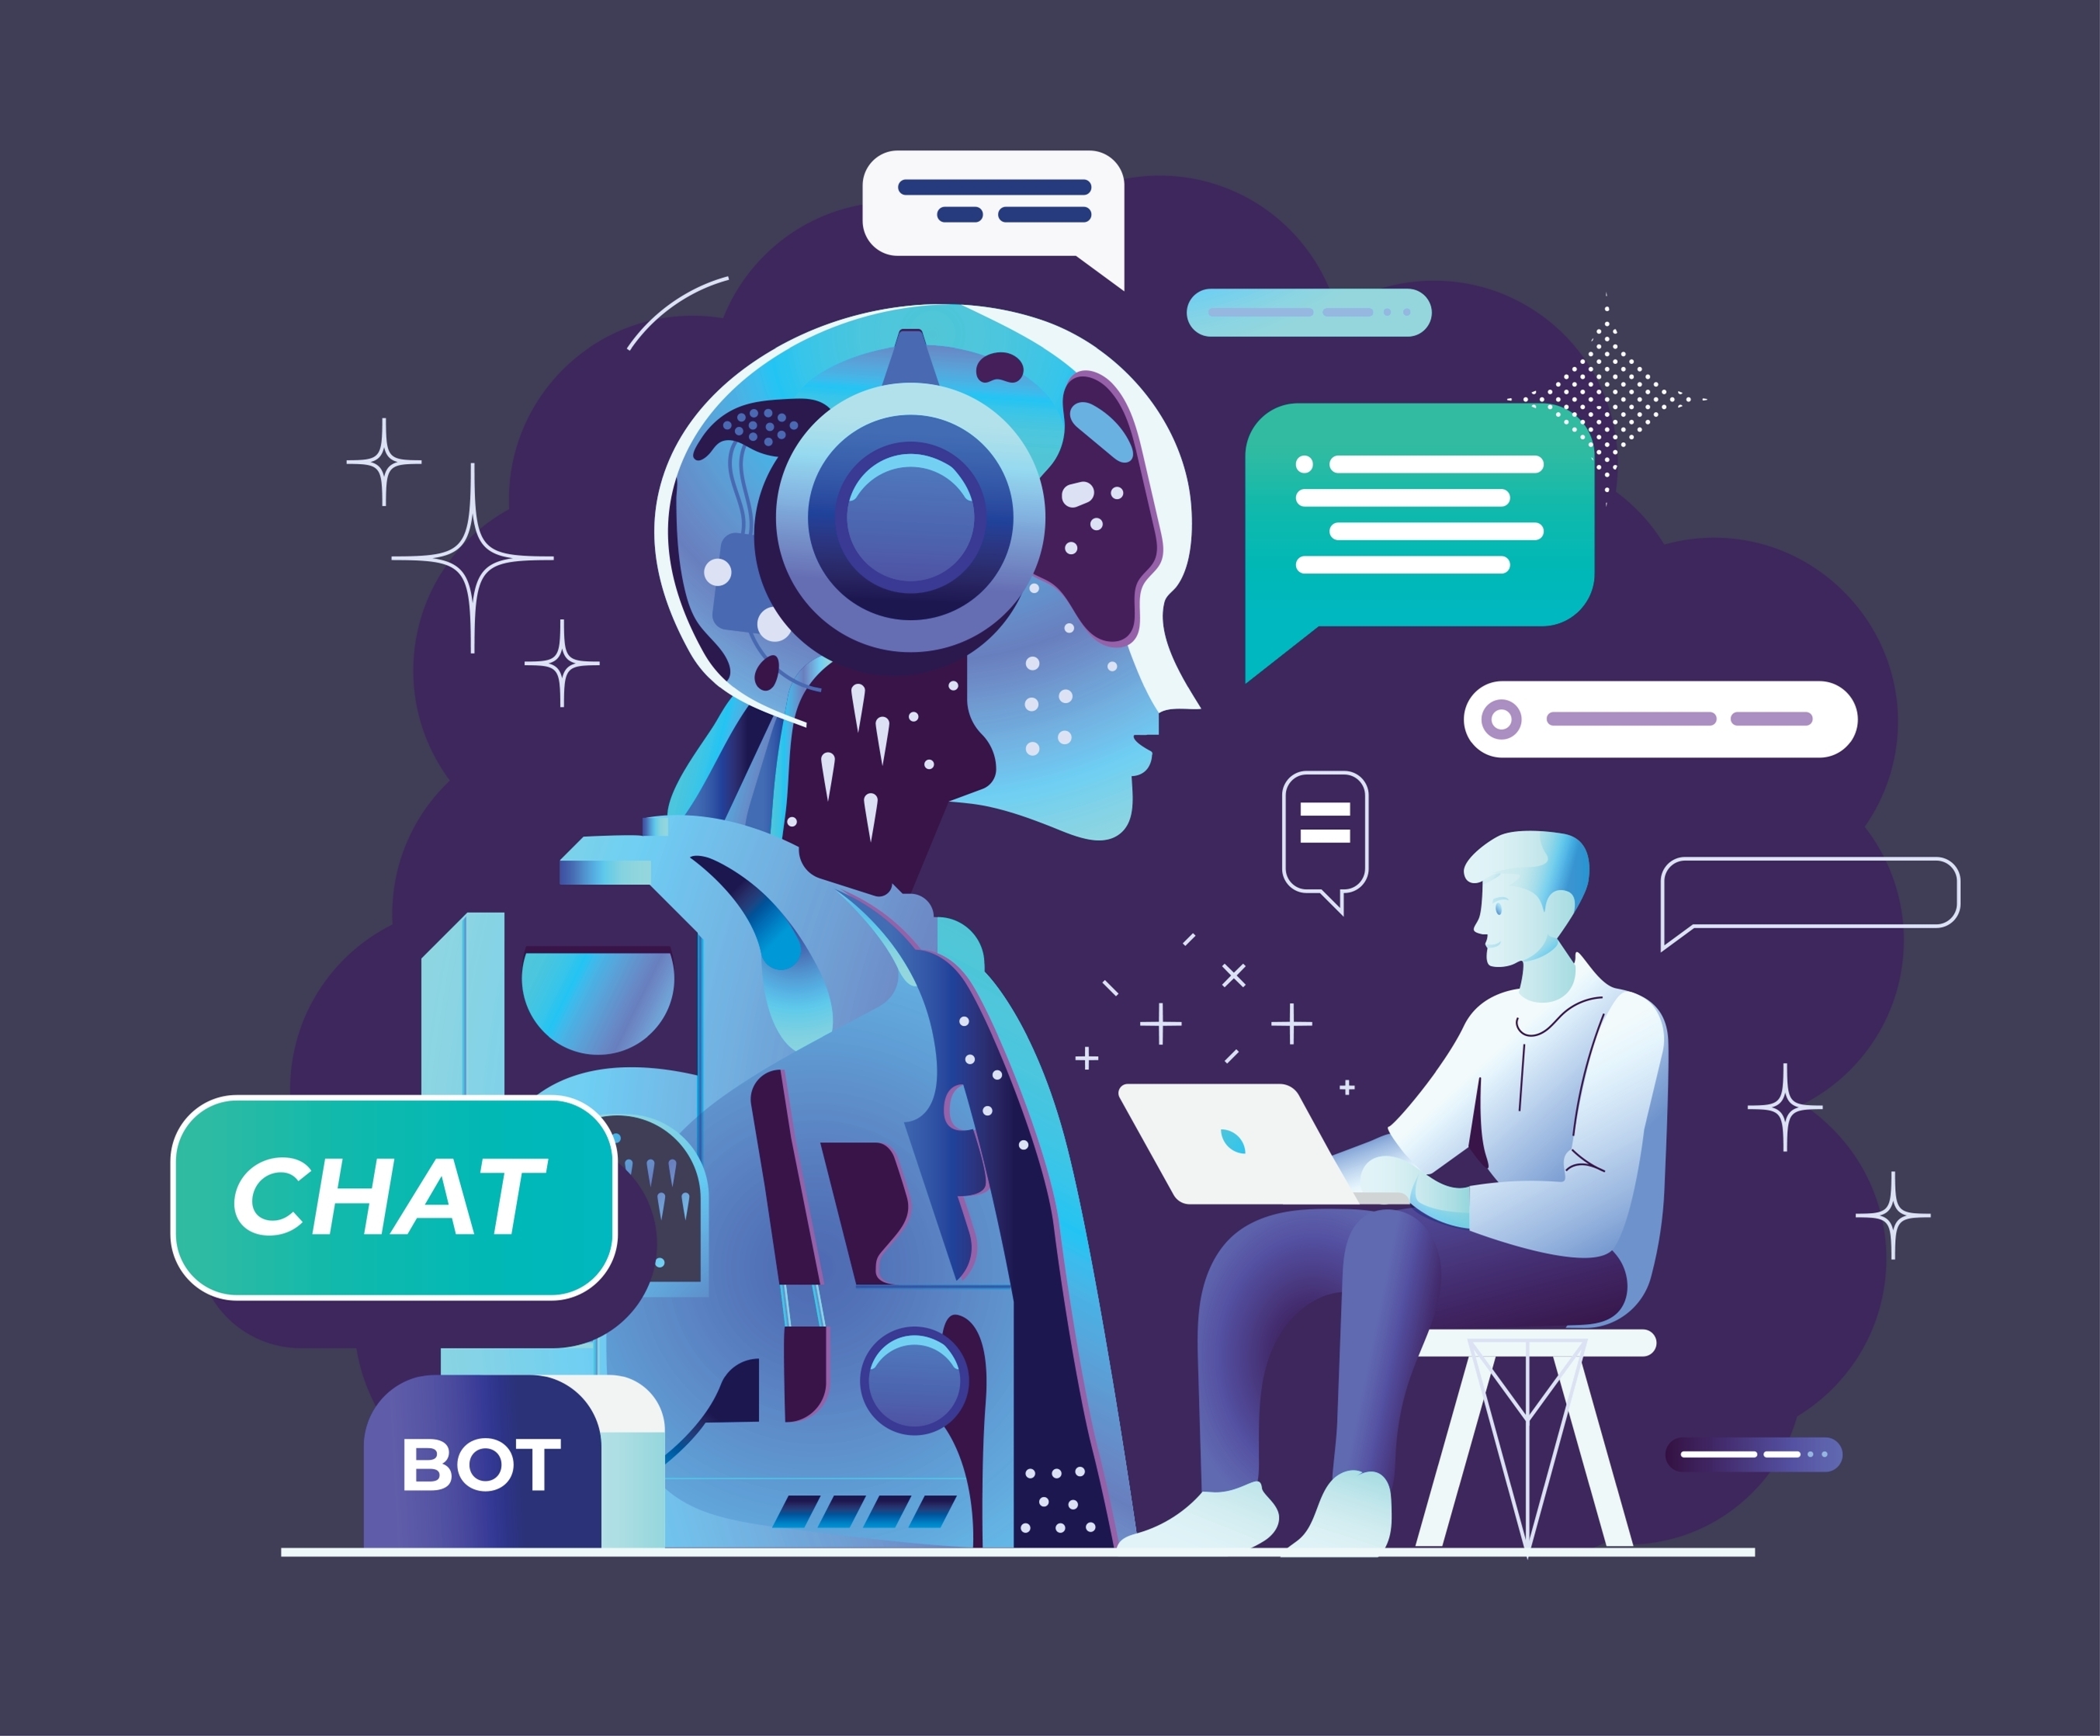 enhance customer experience with AI tools